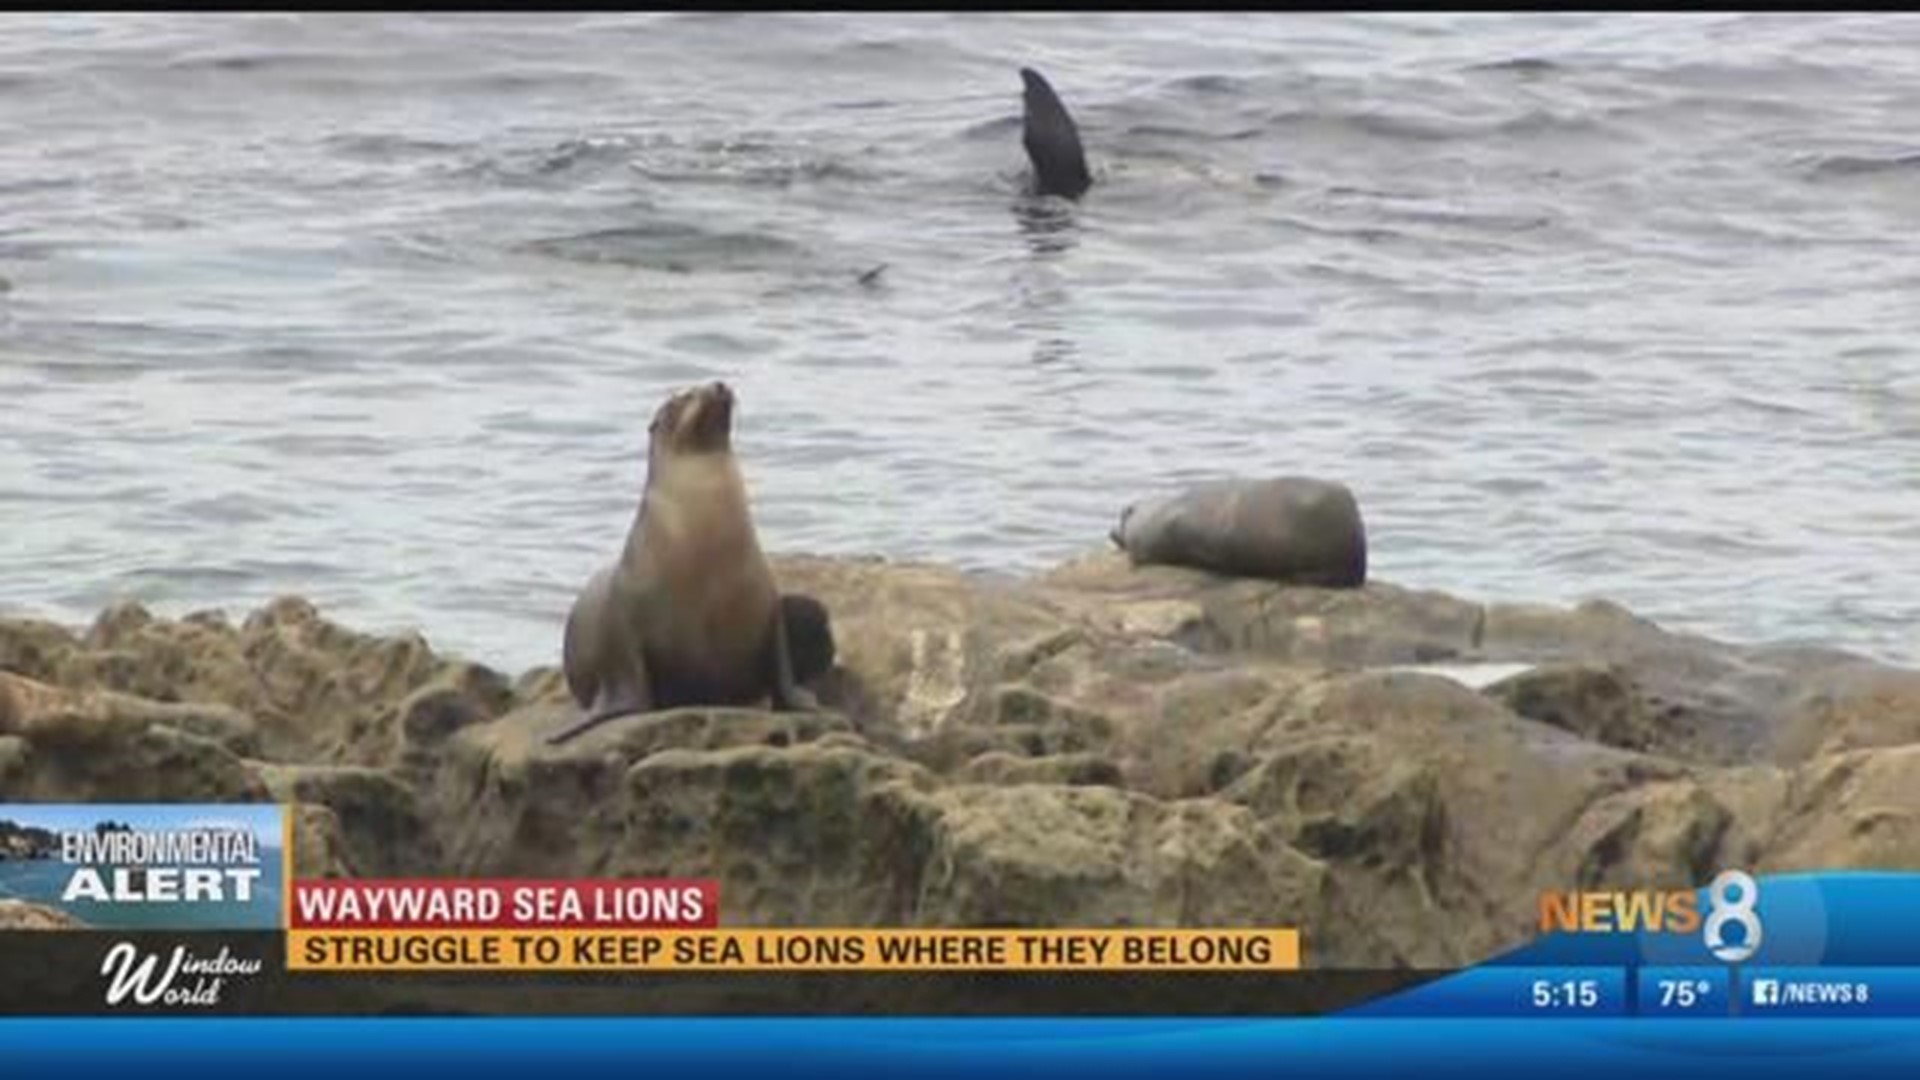 Where to See Sea Lions in California - American Oceans